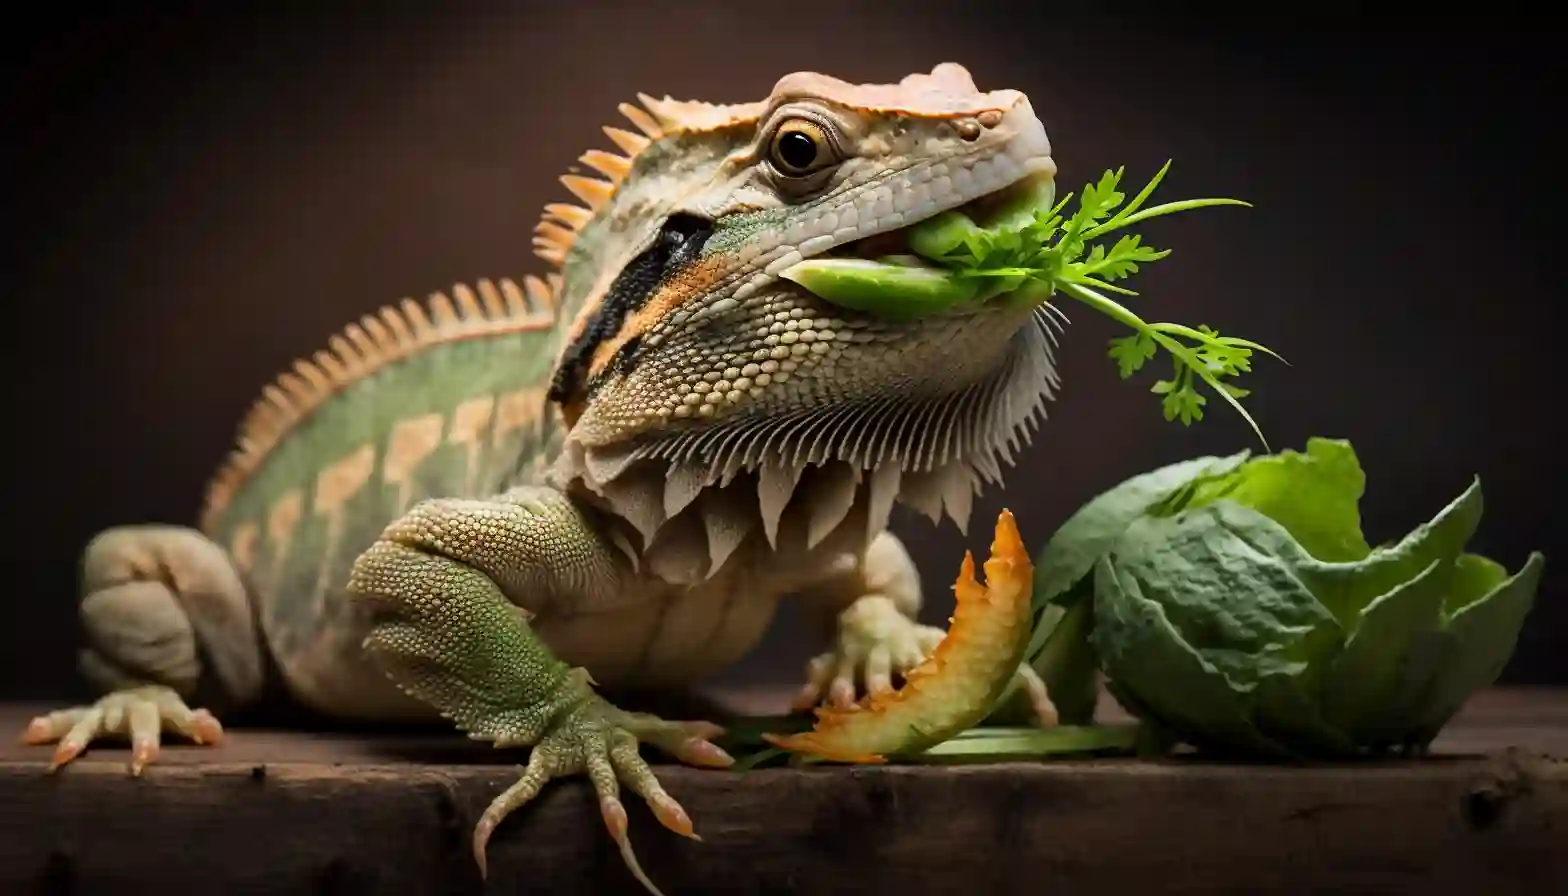 Can Bearded Dragons Eat Snap Peas?